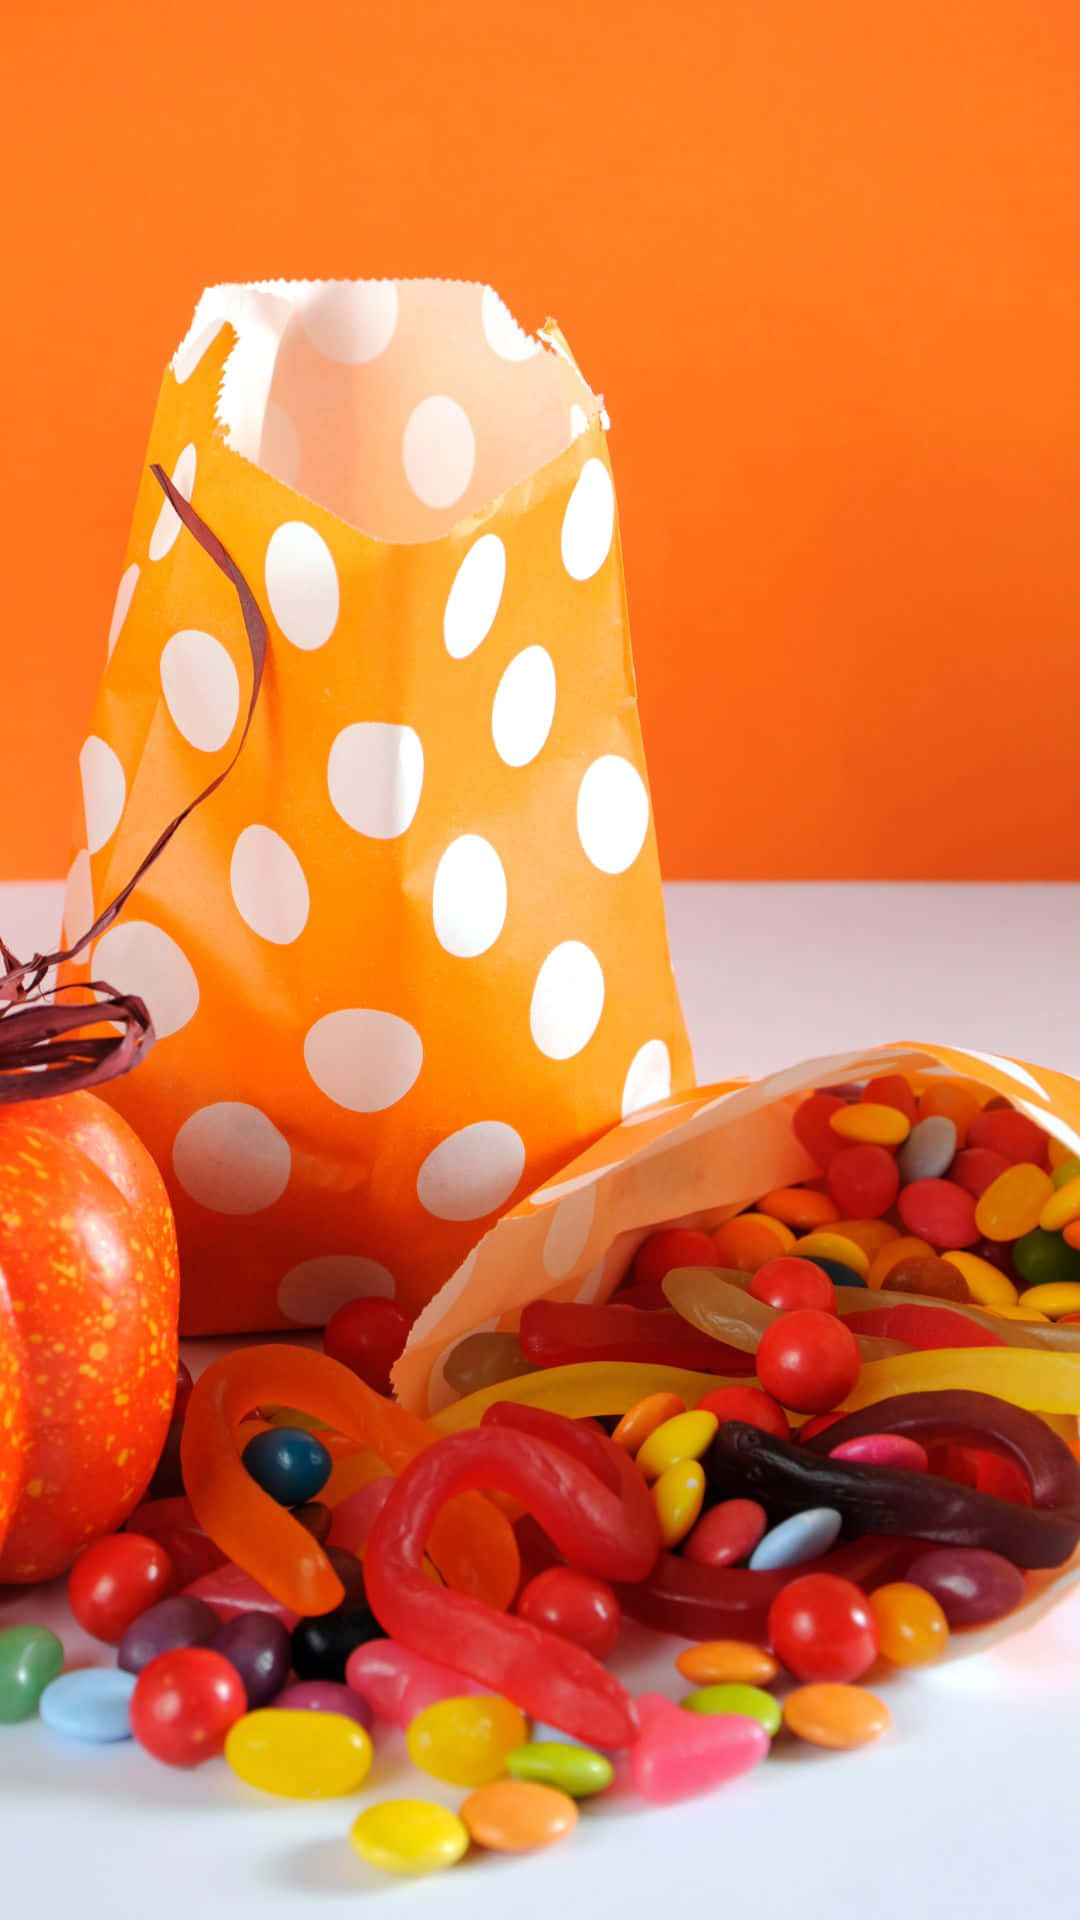 Get ready for Halloween with these festive Trick-or-Treat bags! Wallpaper